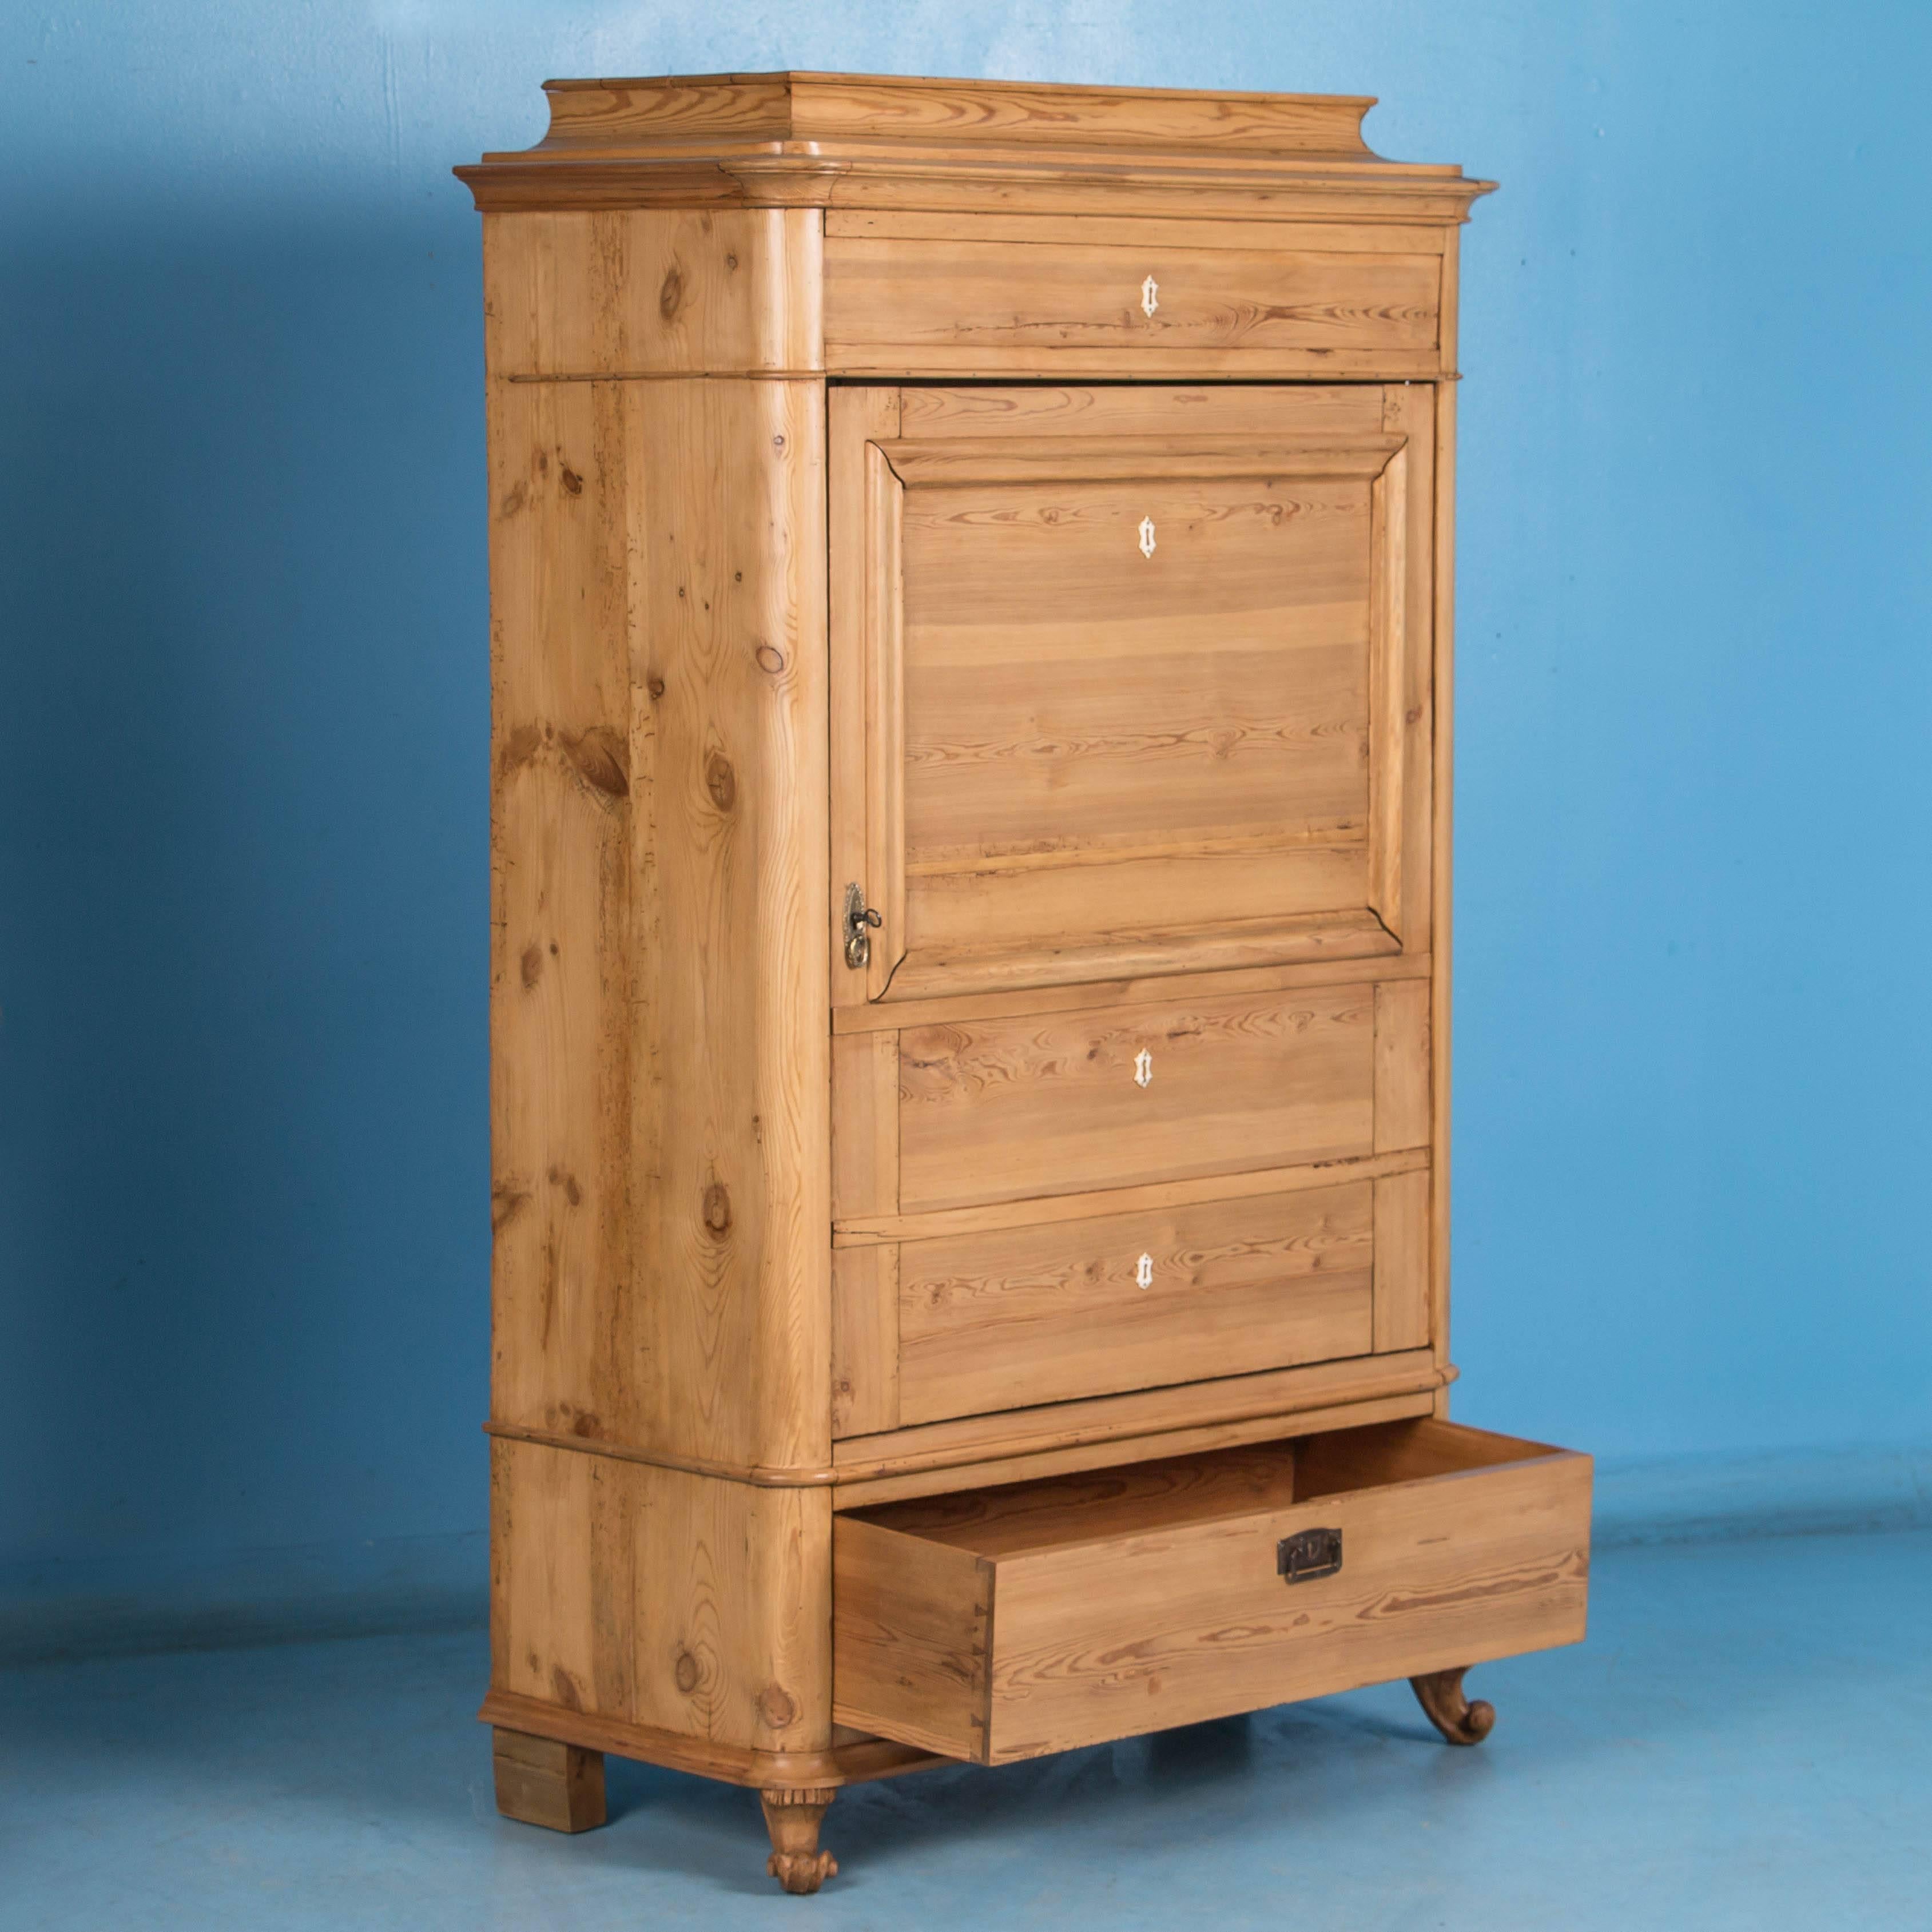 This single door pine armoire is know as a 